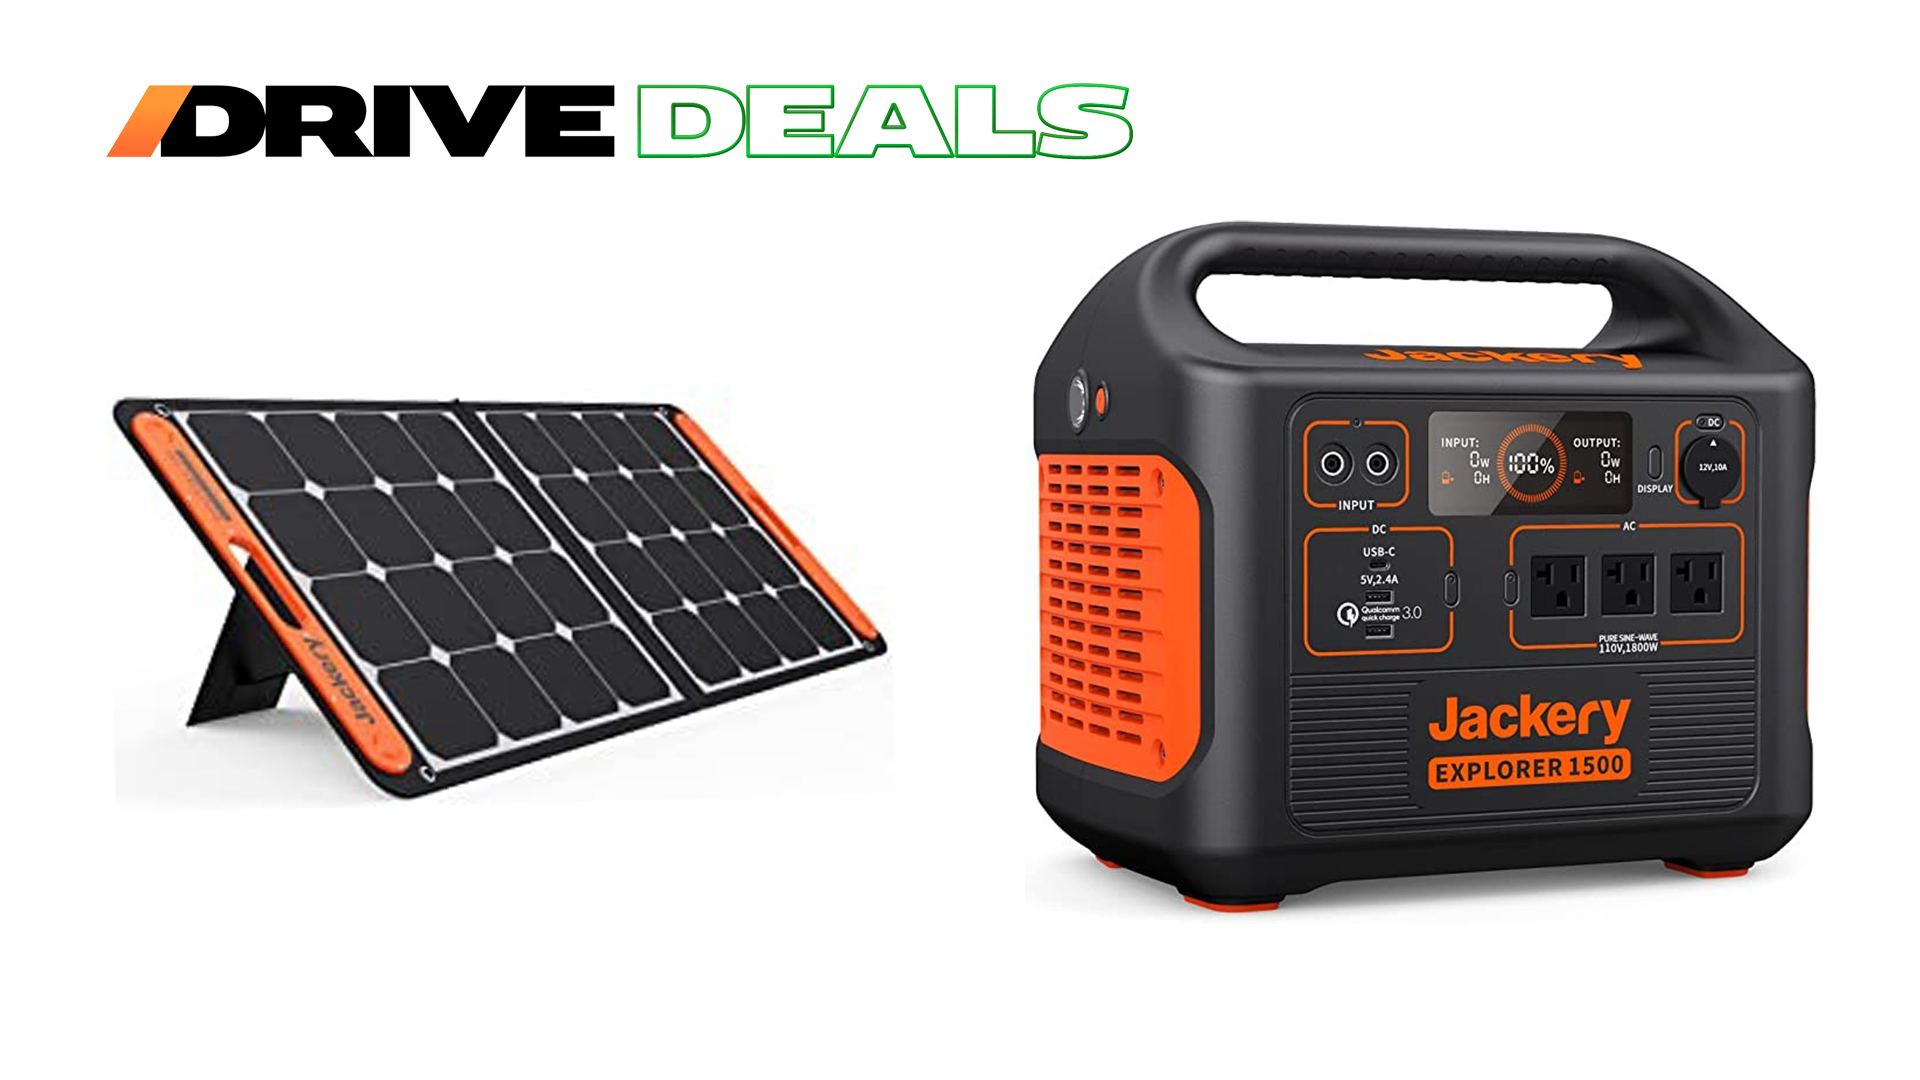 Get Some of the Greatest Deals Ever On Jackery Portable Generators